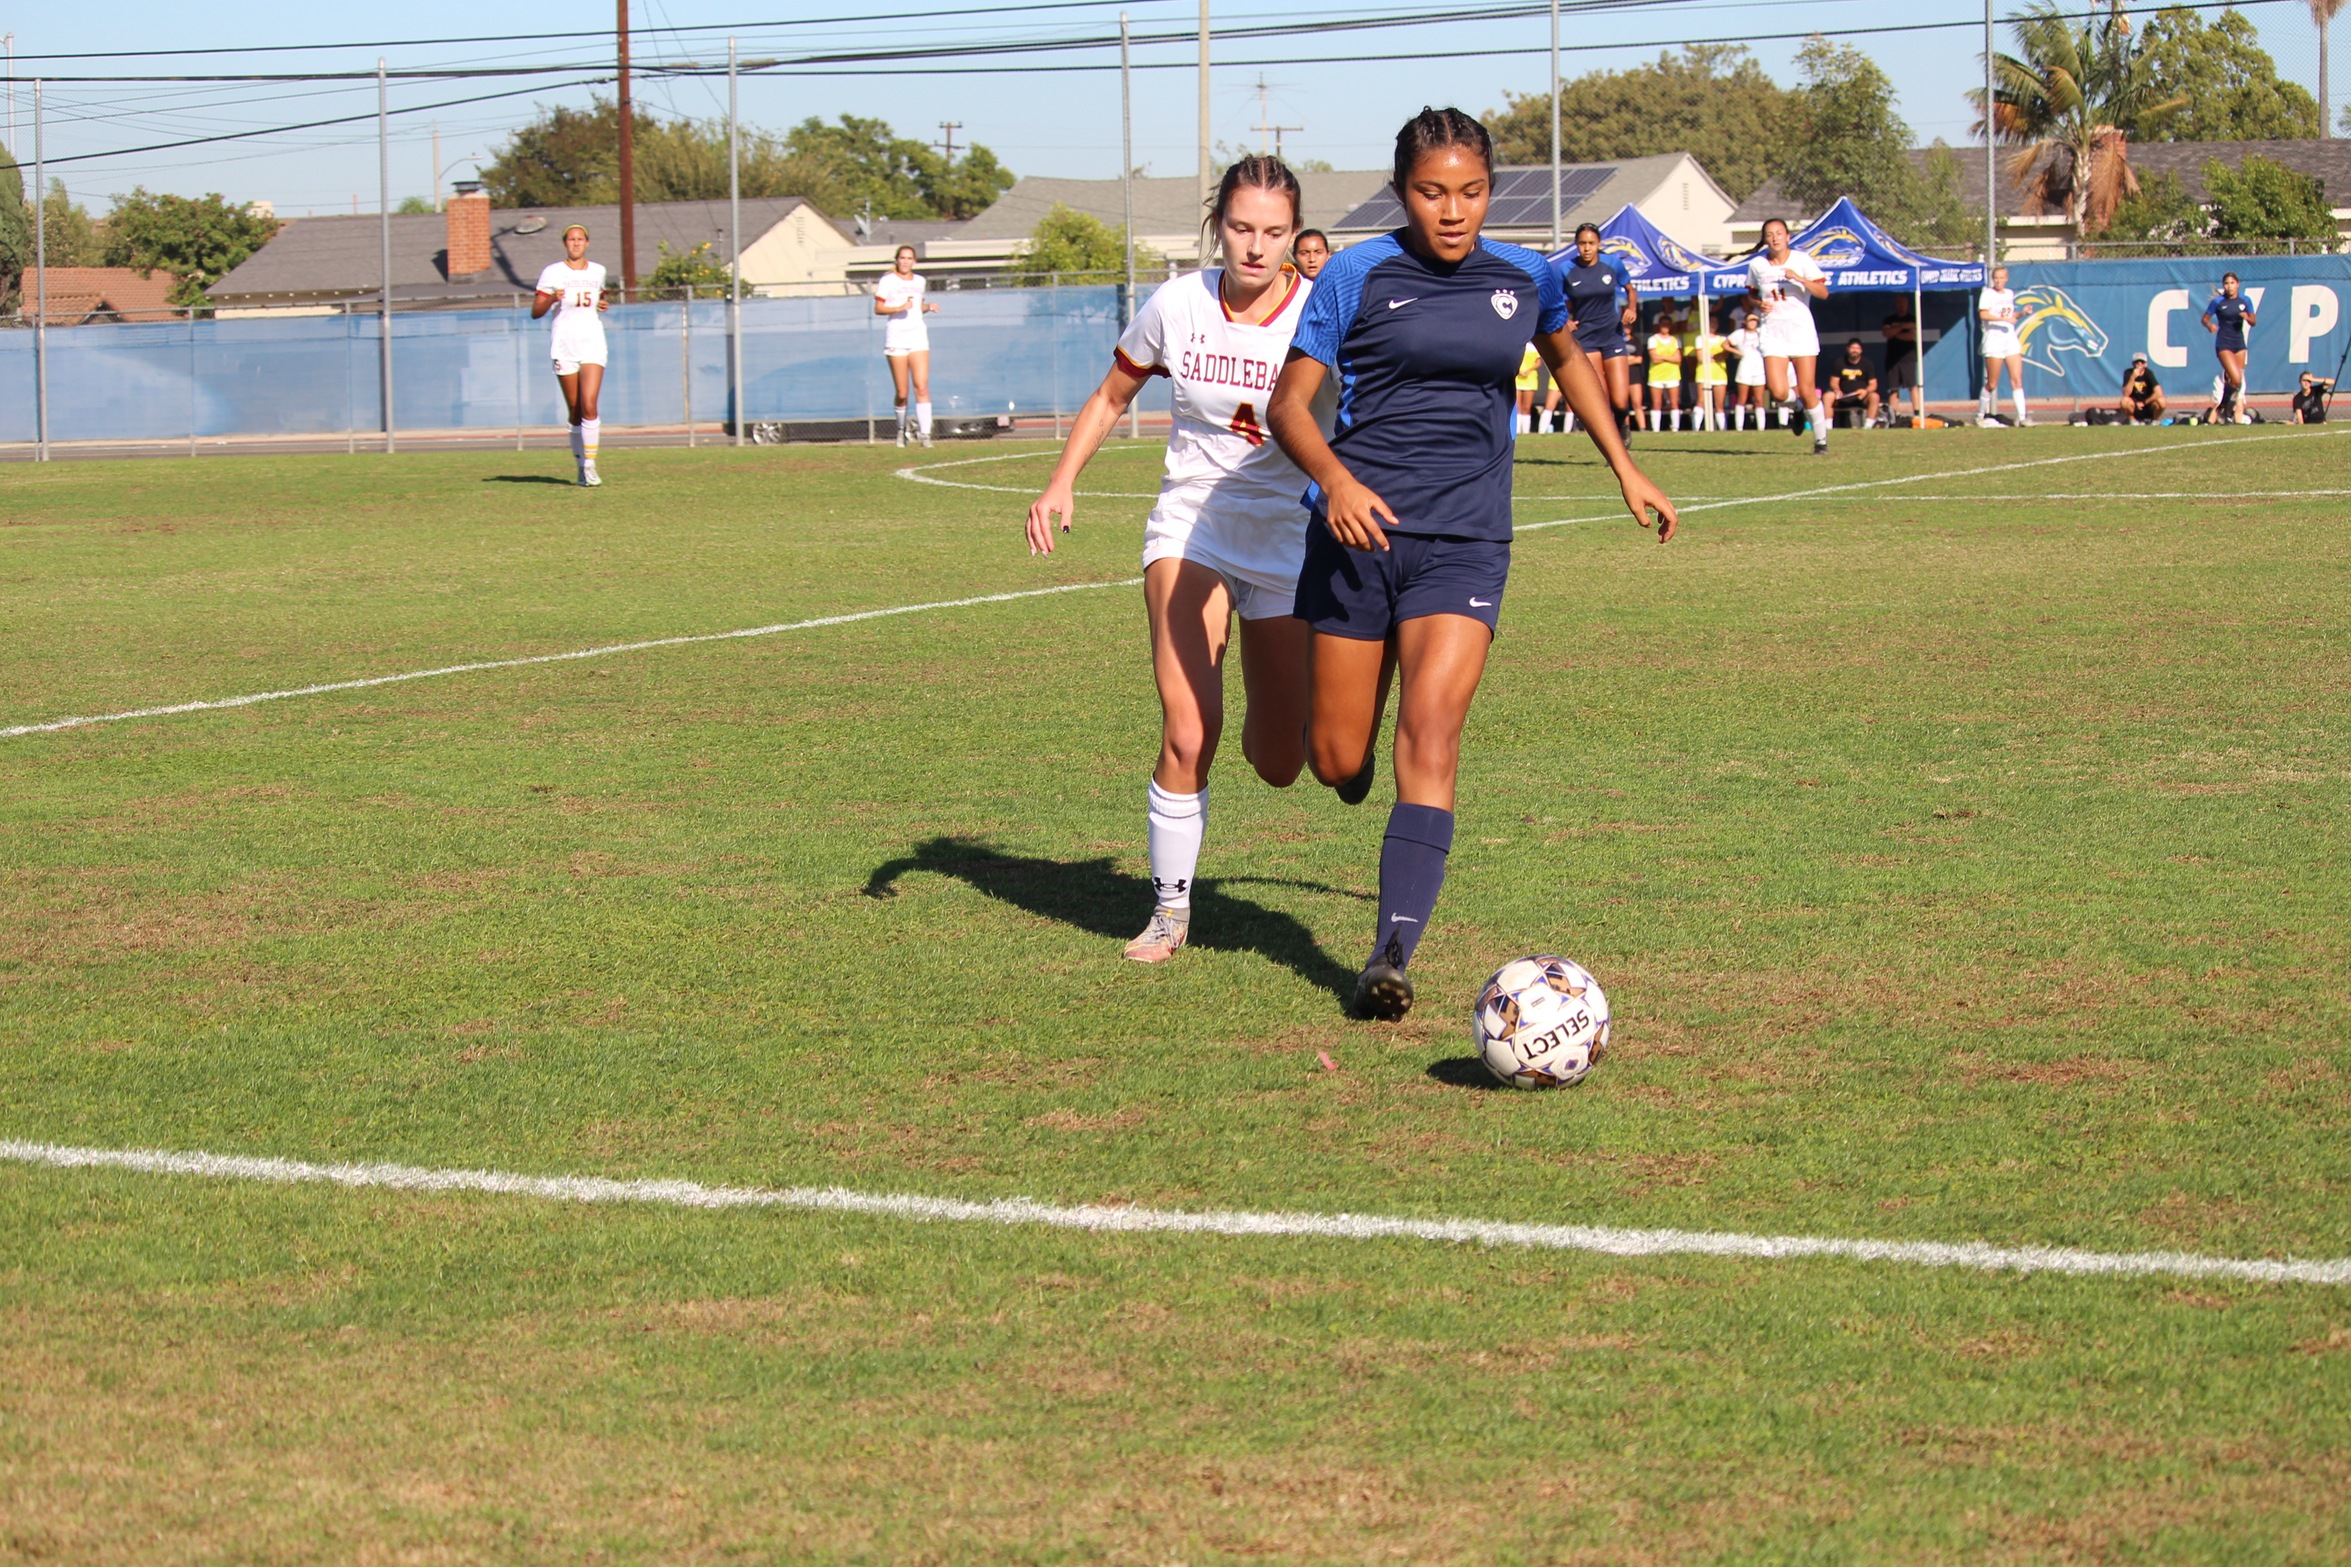 Cypress Ends in a Draw Against Saddleback